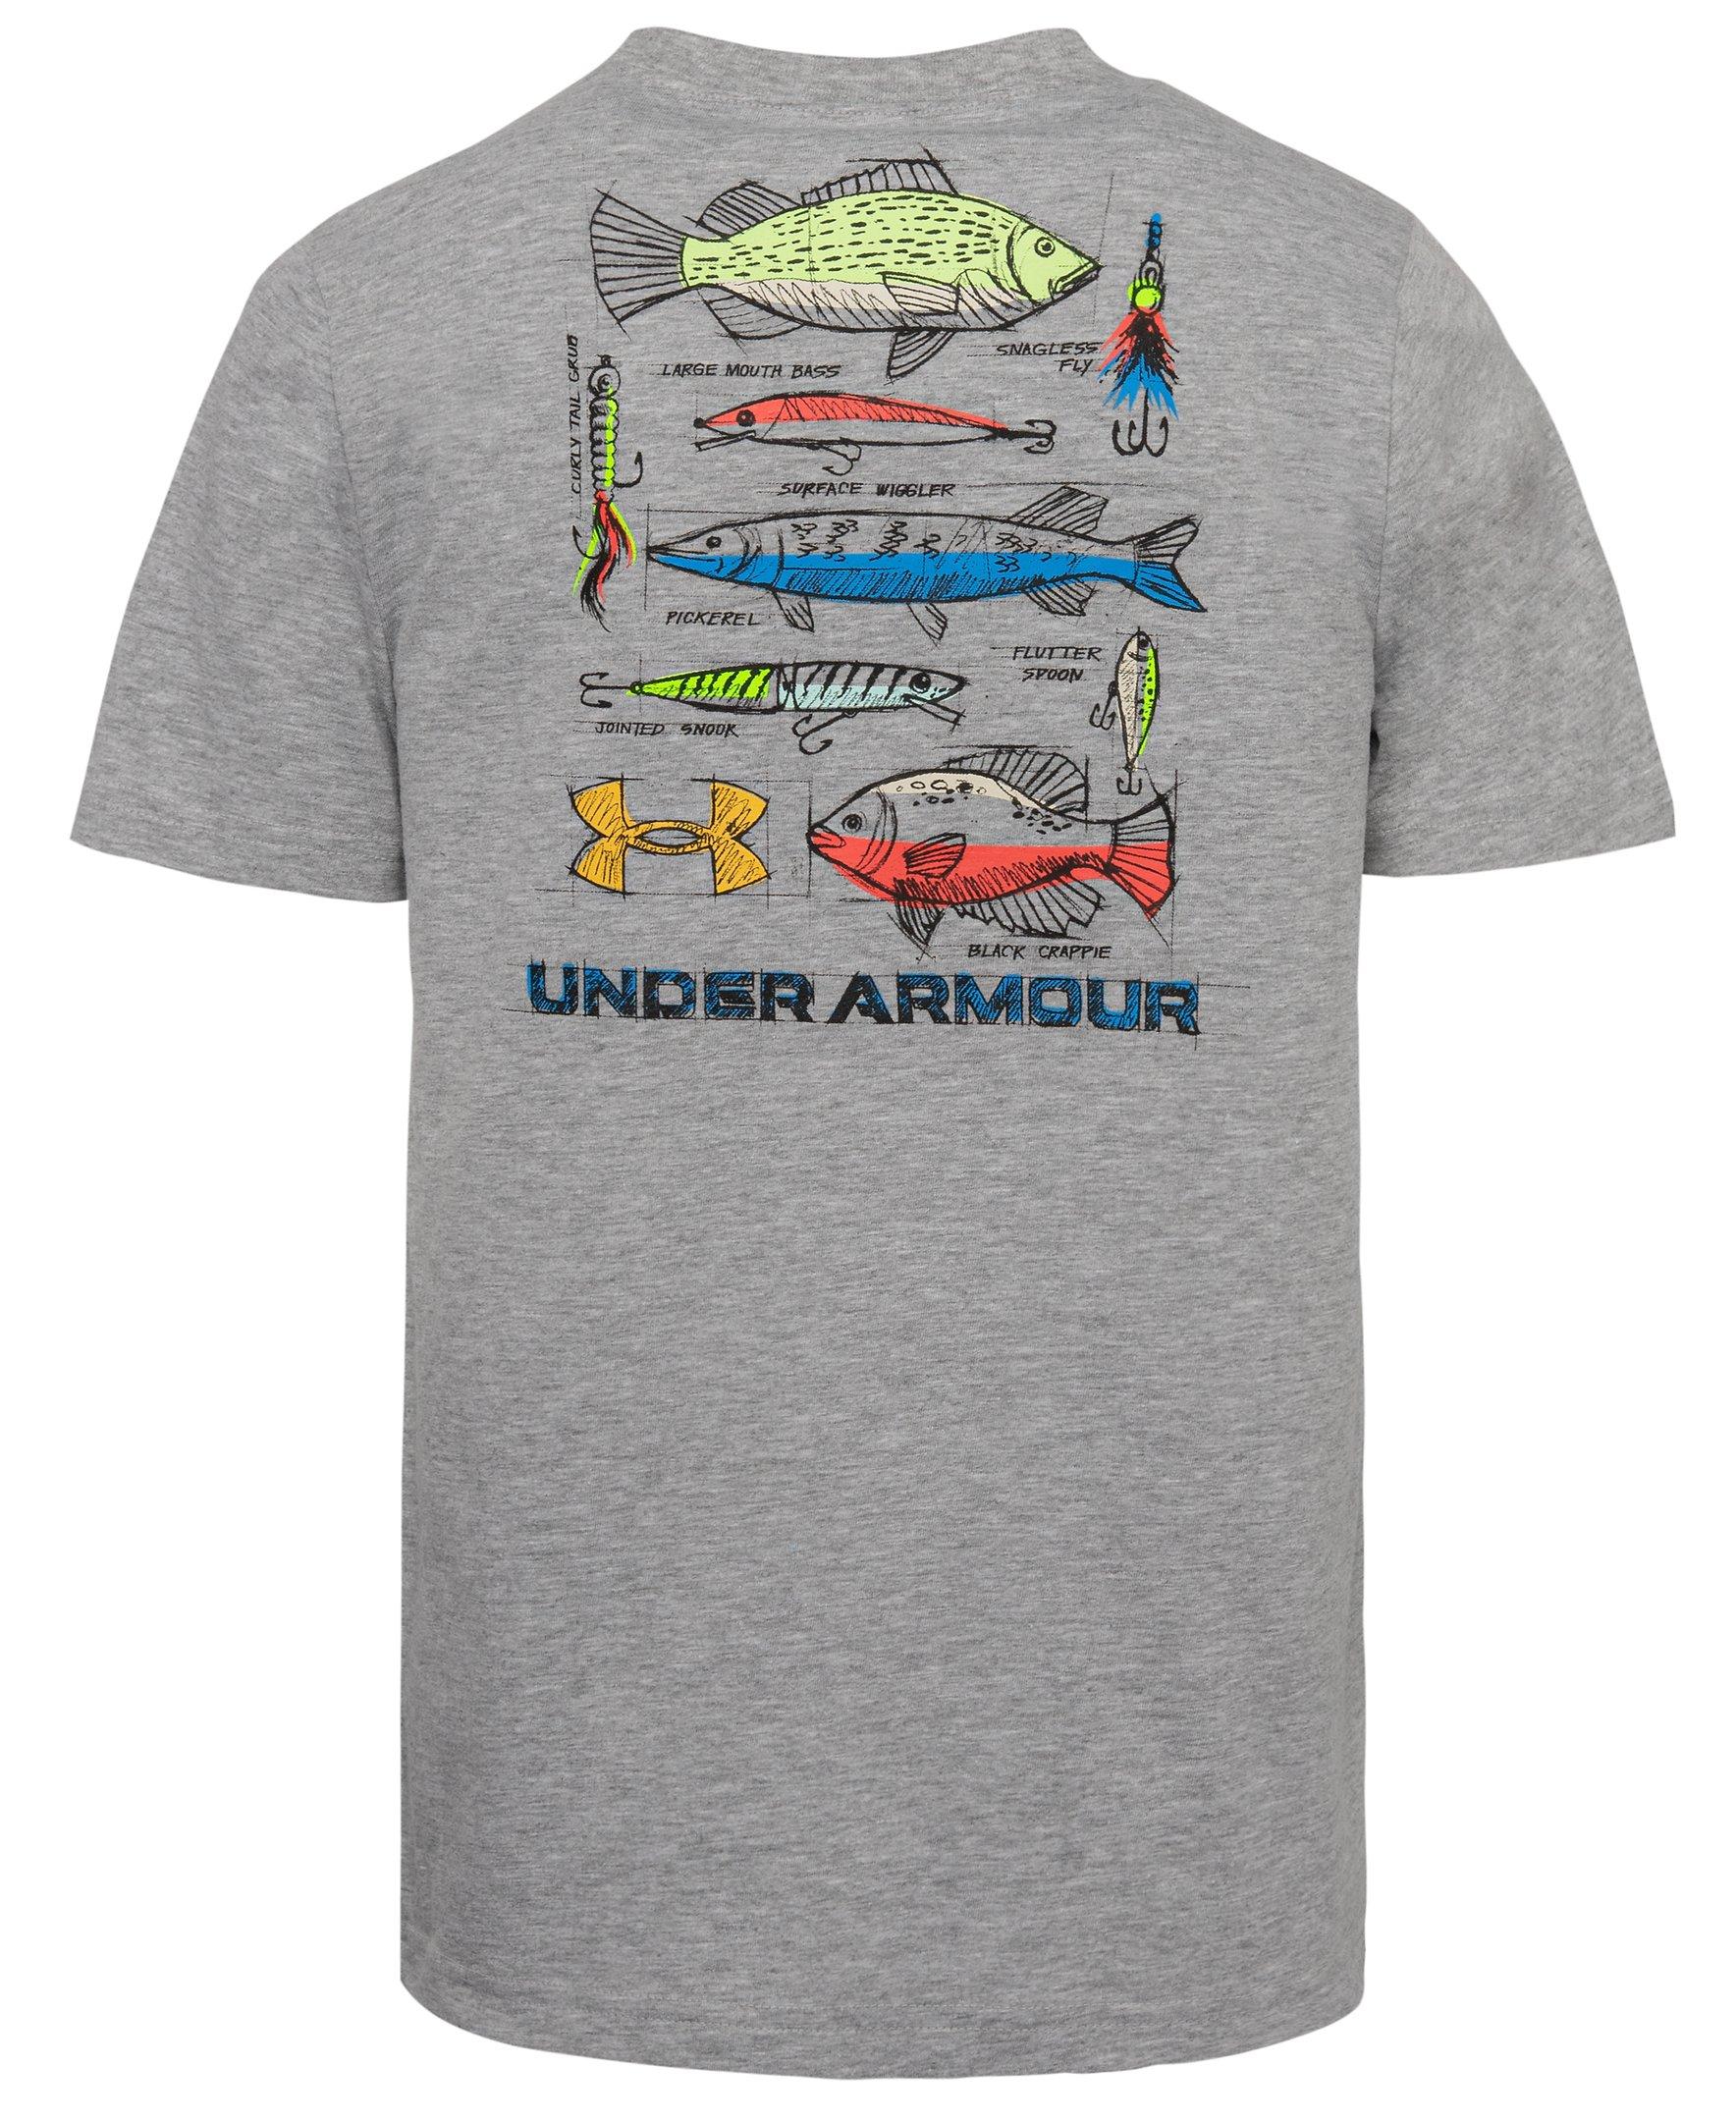 Under Armour Youth Sketch Fish Short Sleeve Tee